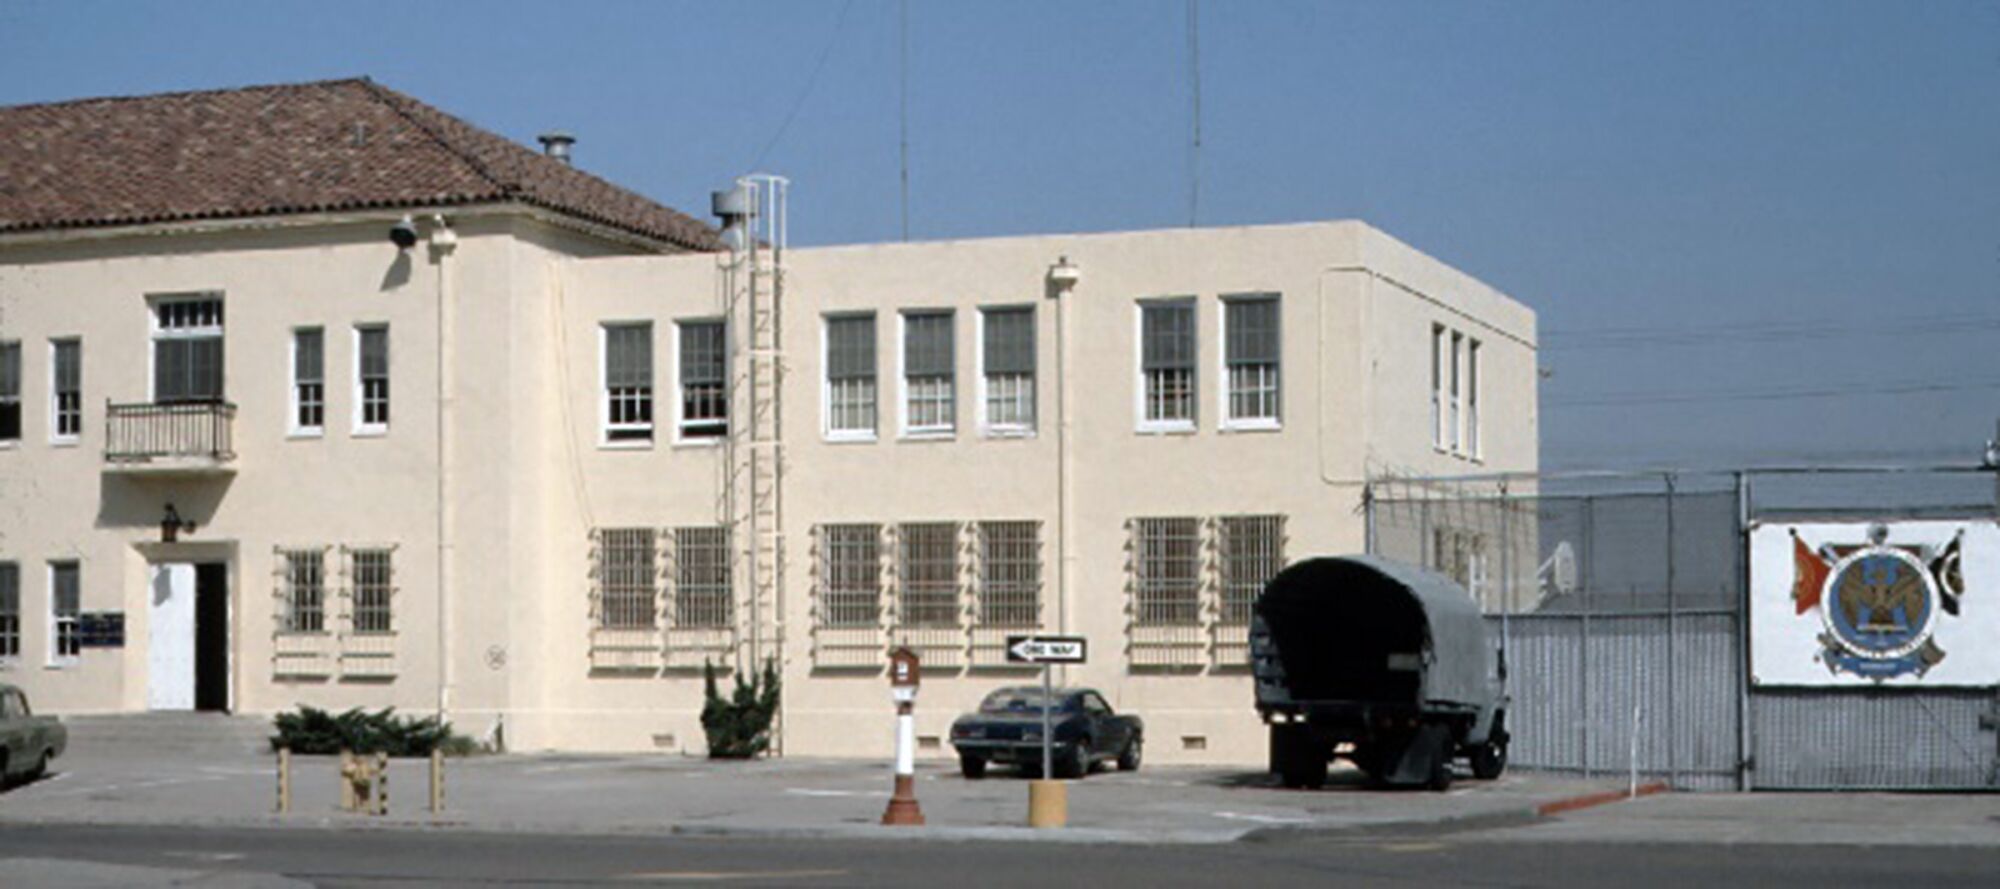 The San Diego Naval Station brig, where the accused sailors were held.